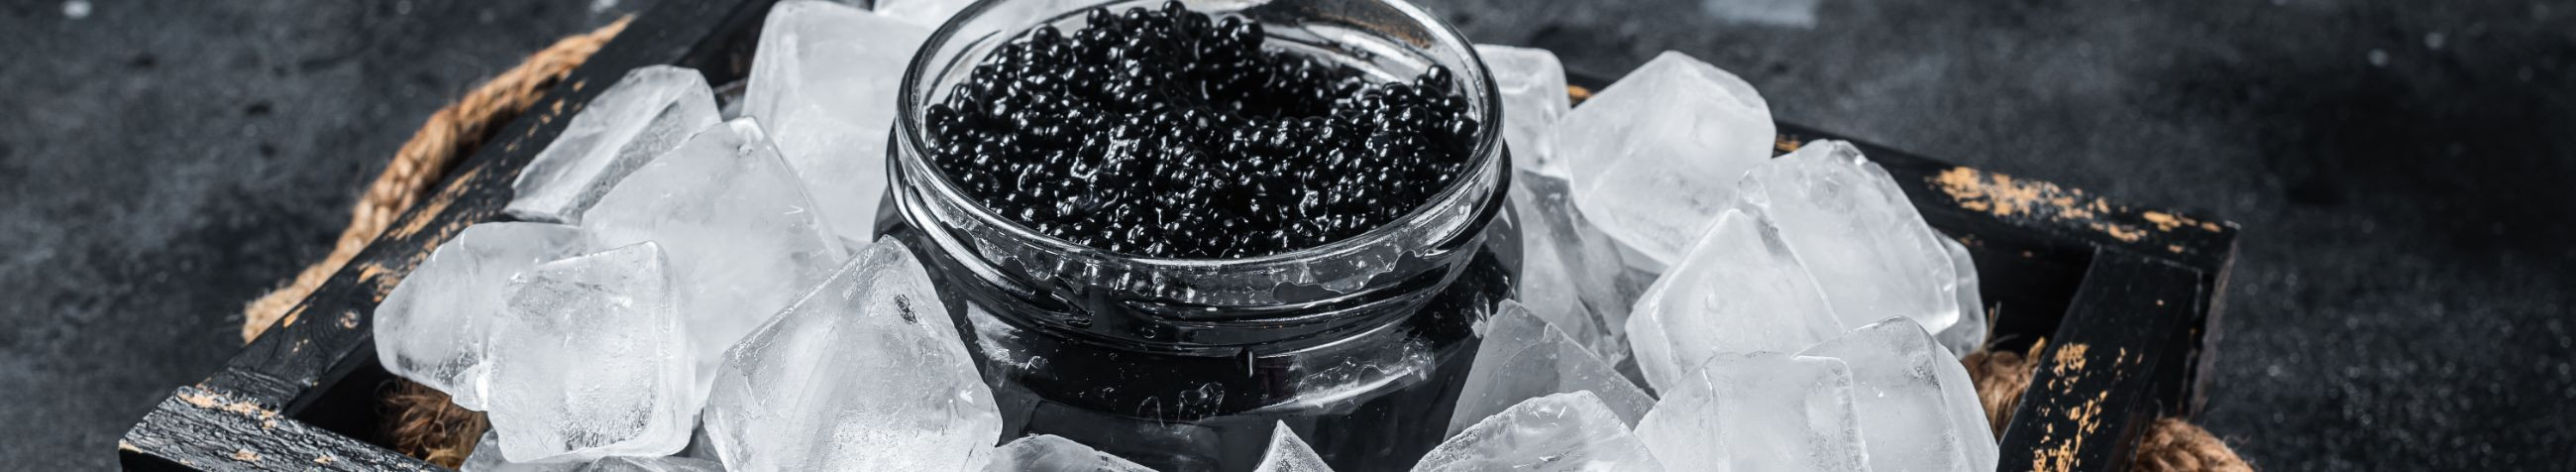 We offer an exquisite range of fresh caviar and fish products, complemented by exclusive tasting events.